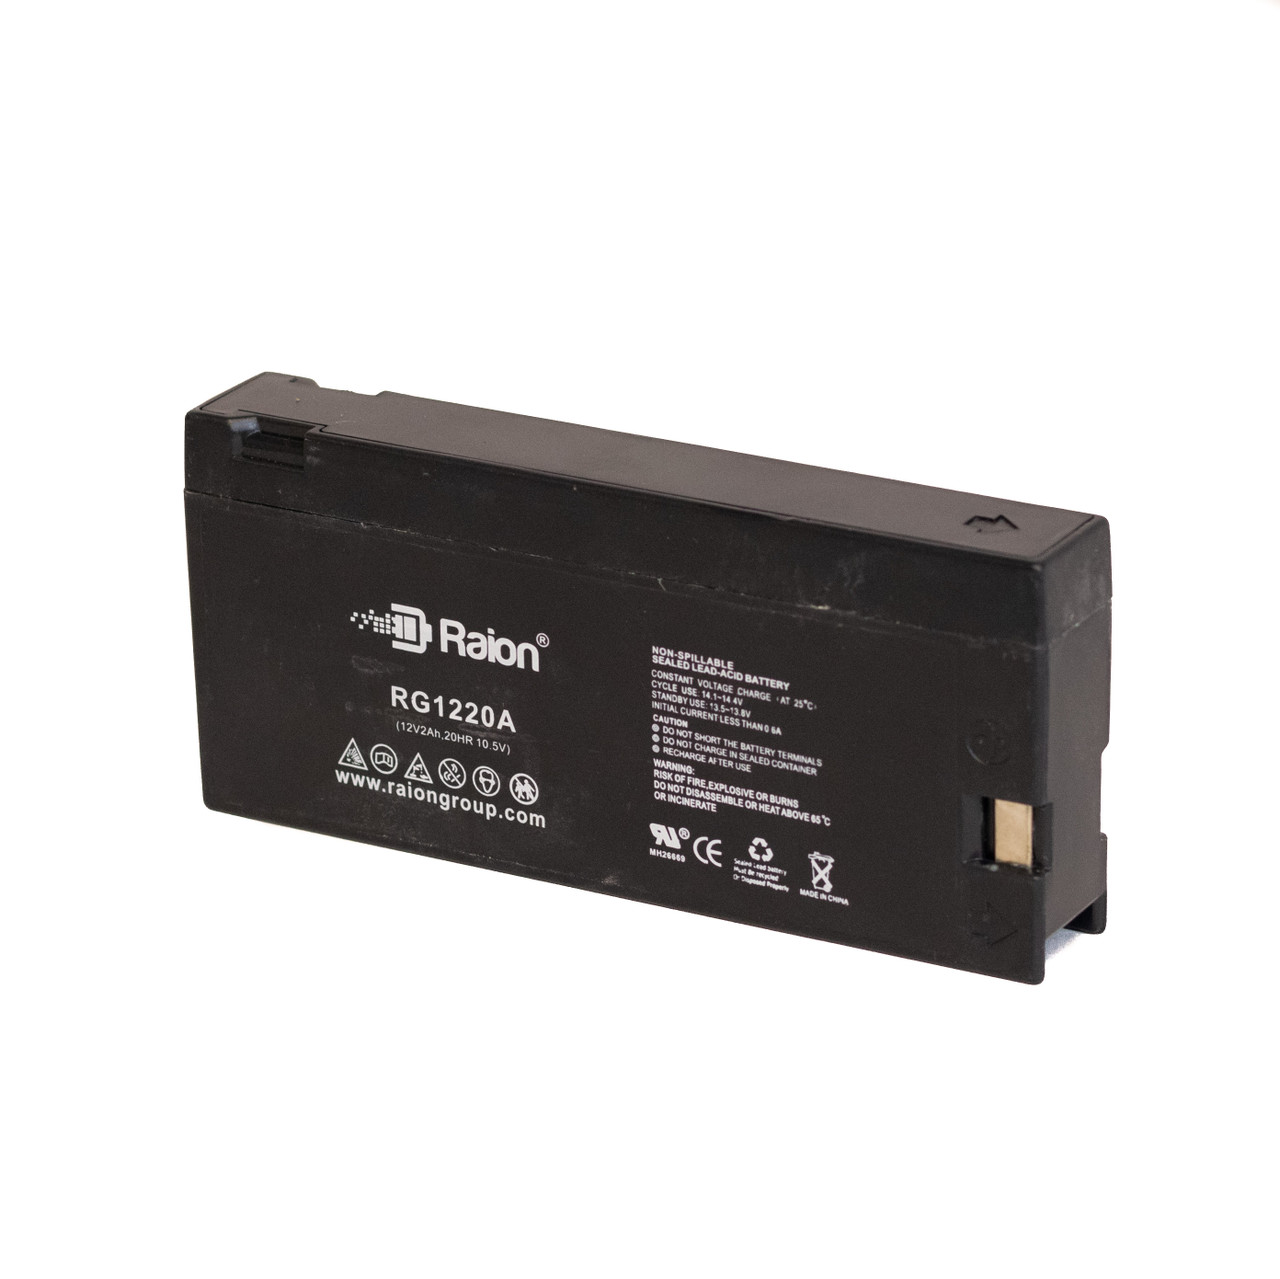 Raion Power RG1220A Replacement Battery for FirstPower FP1220C